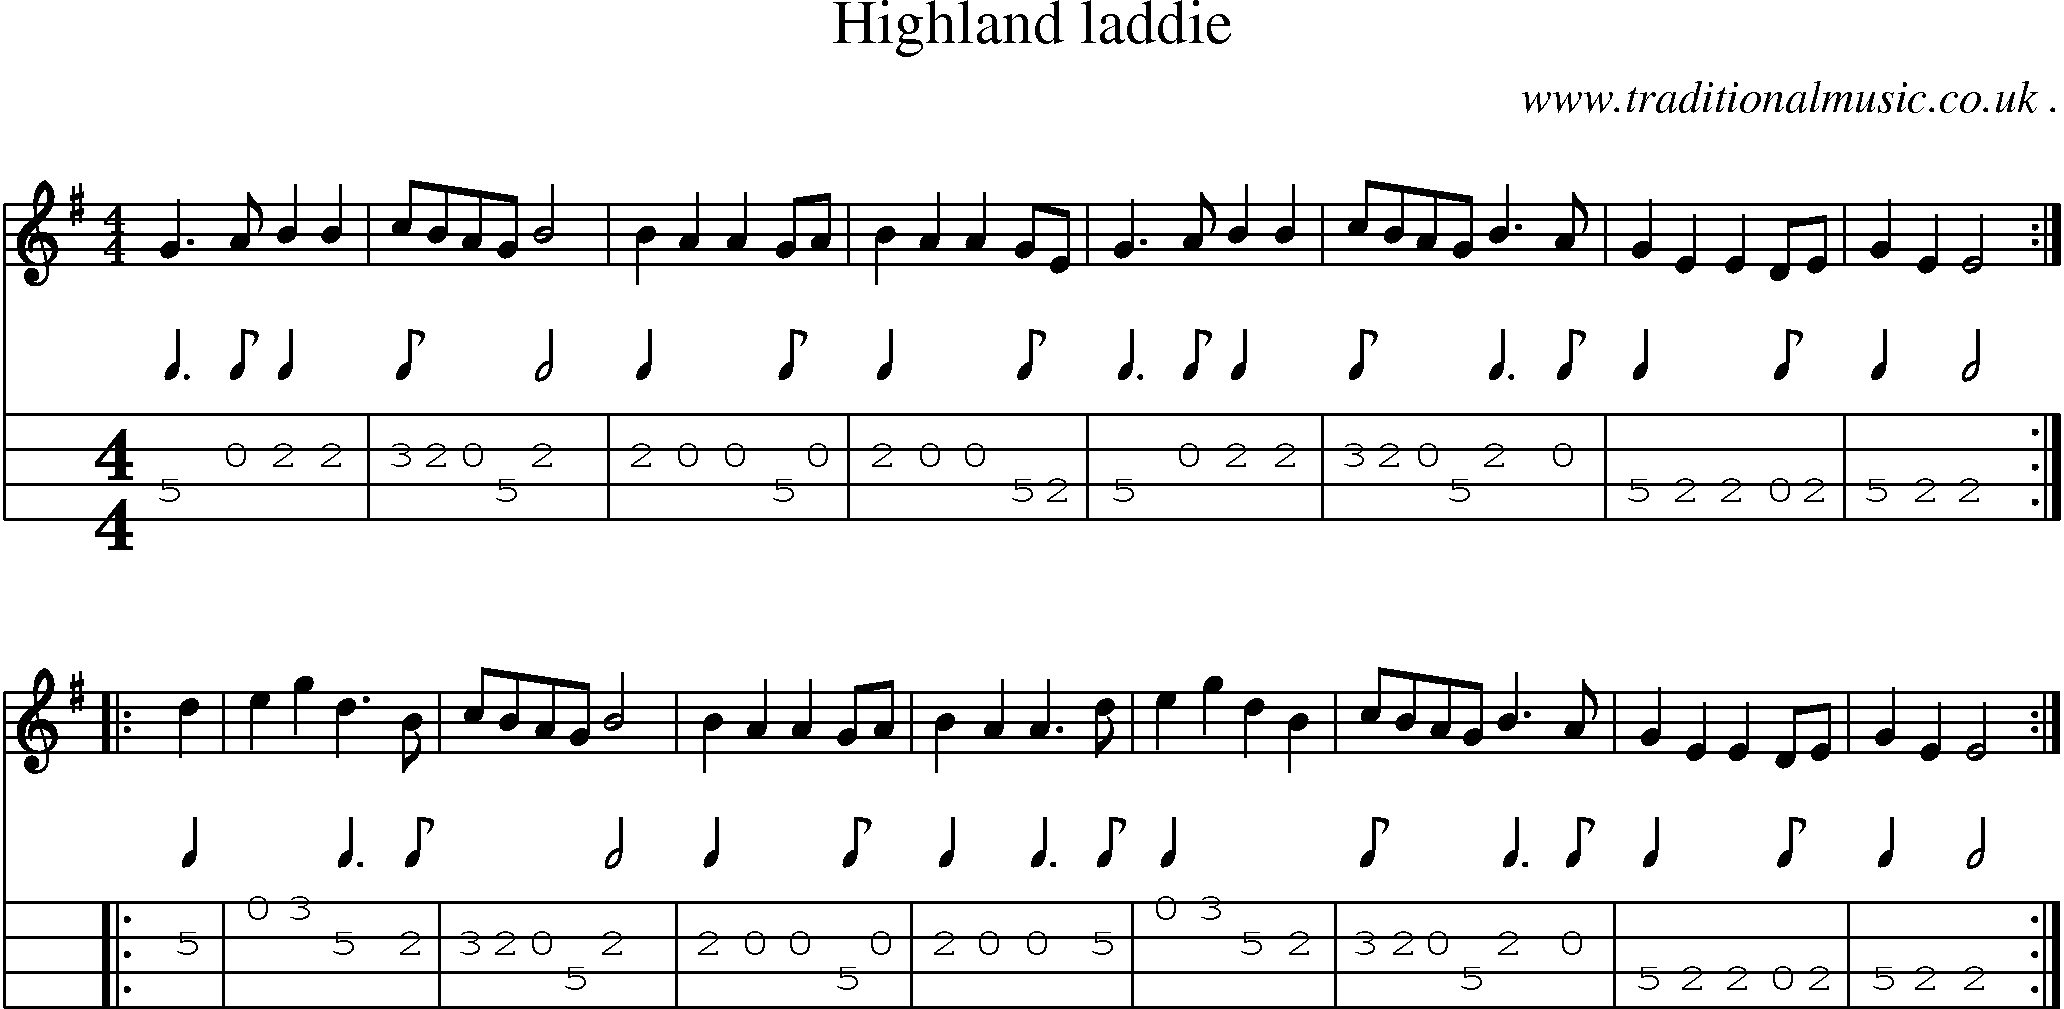 Sheet-music  score, Chords and Mandolin Tabs for Highland Laddie